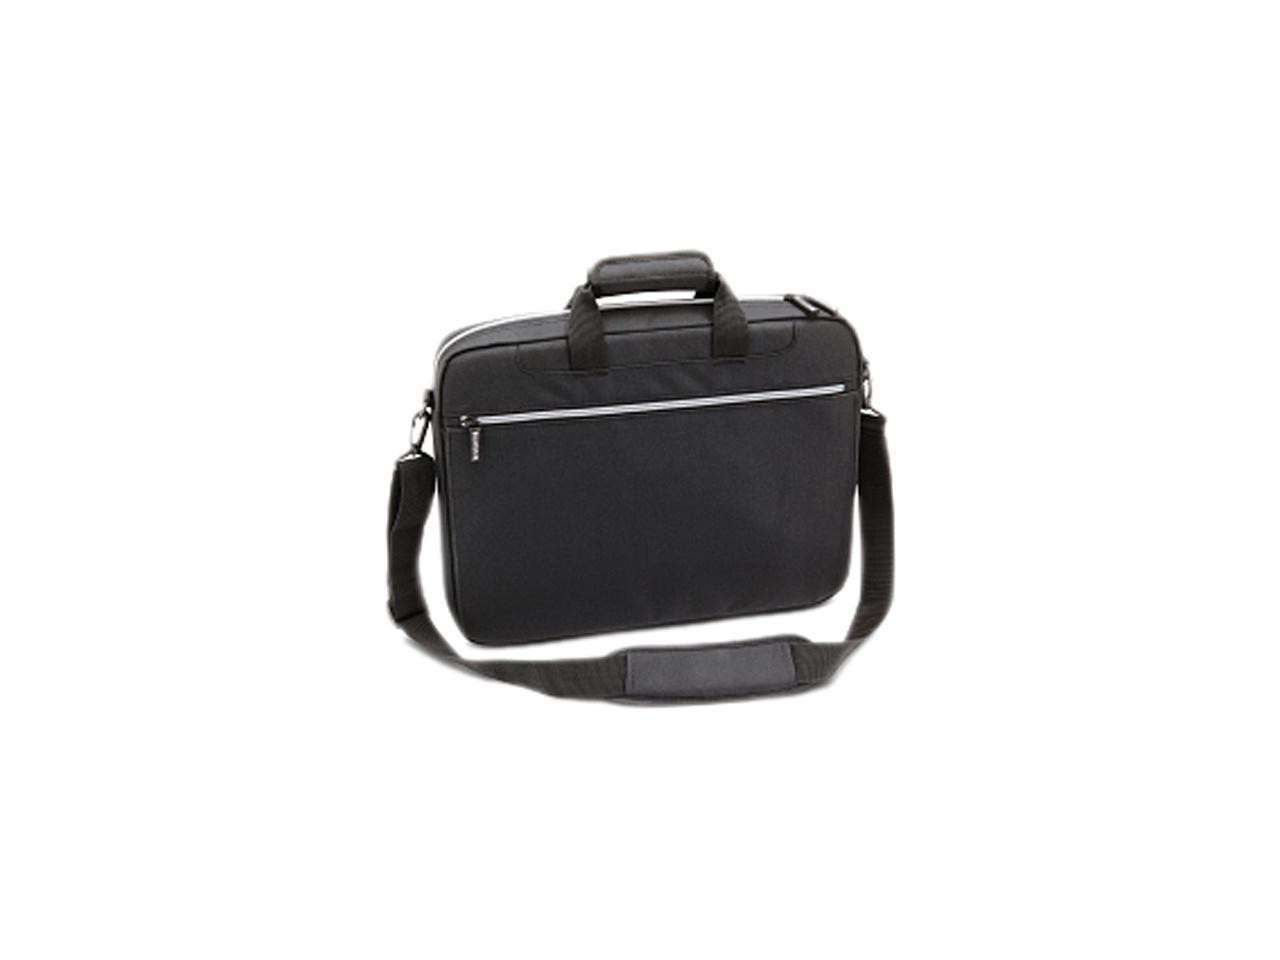 TOSHIBA Black with silver accents 16" Lightweight Carrying Case